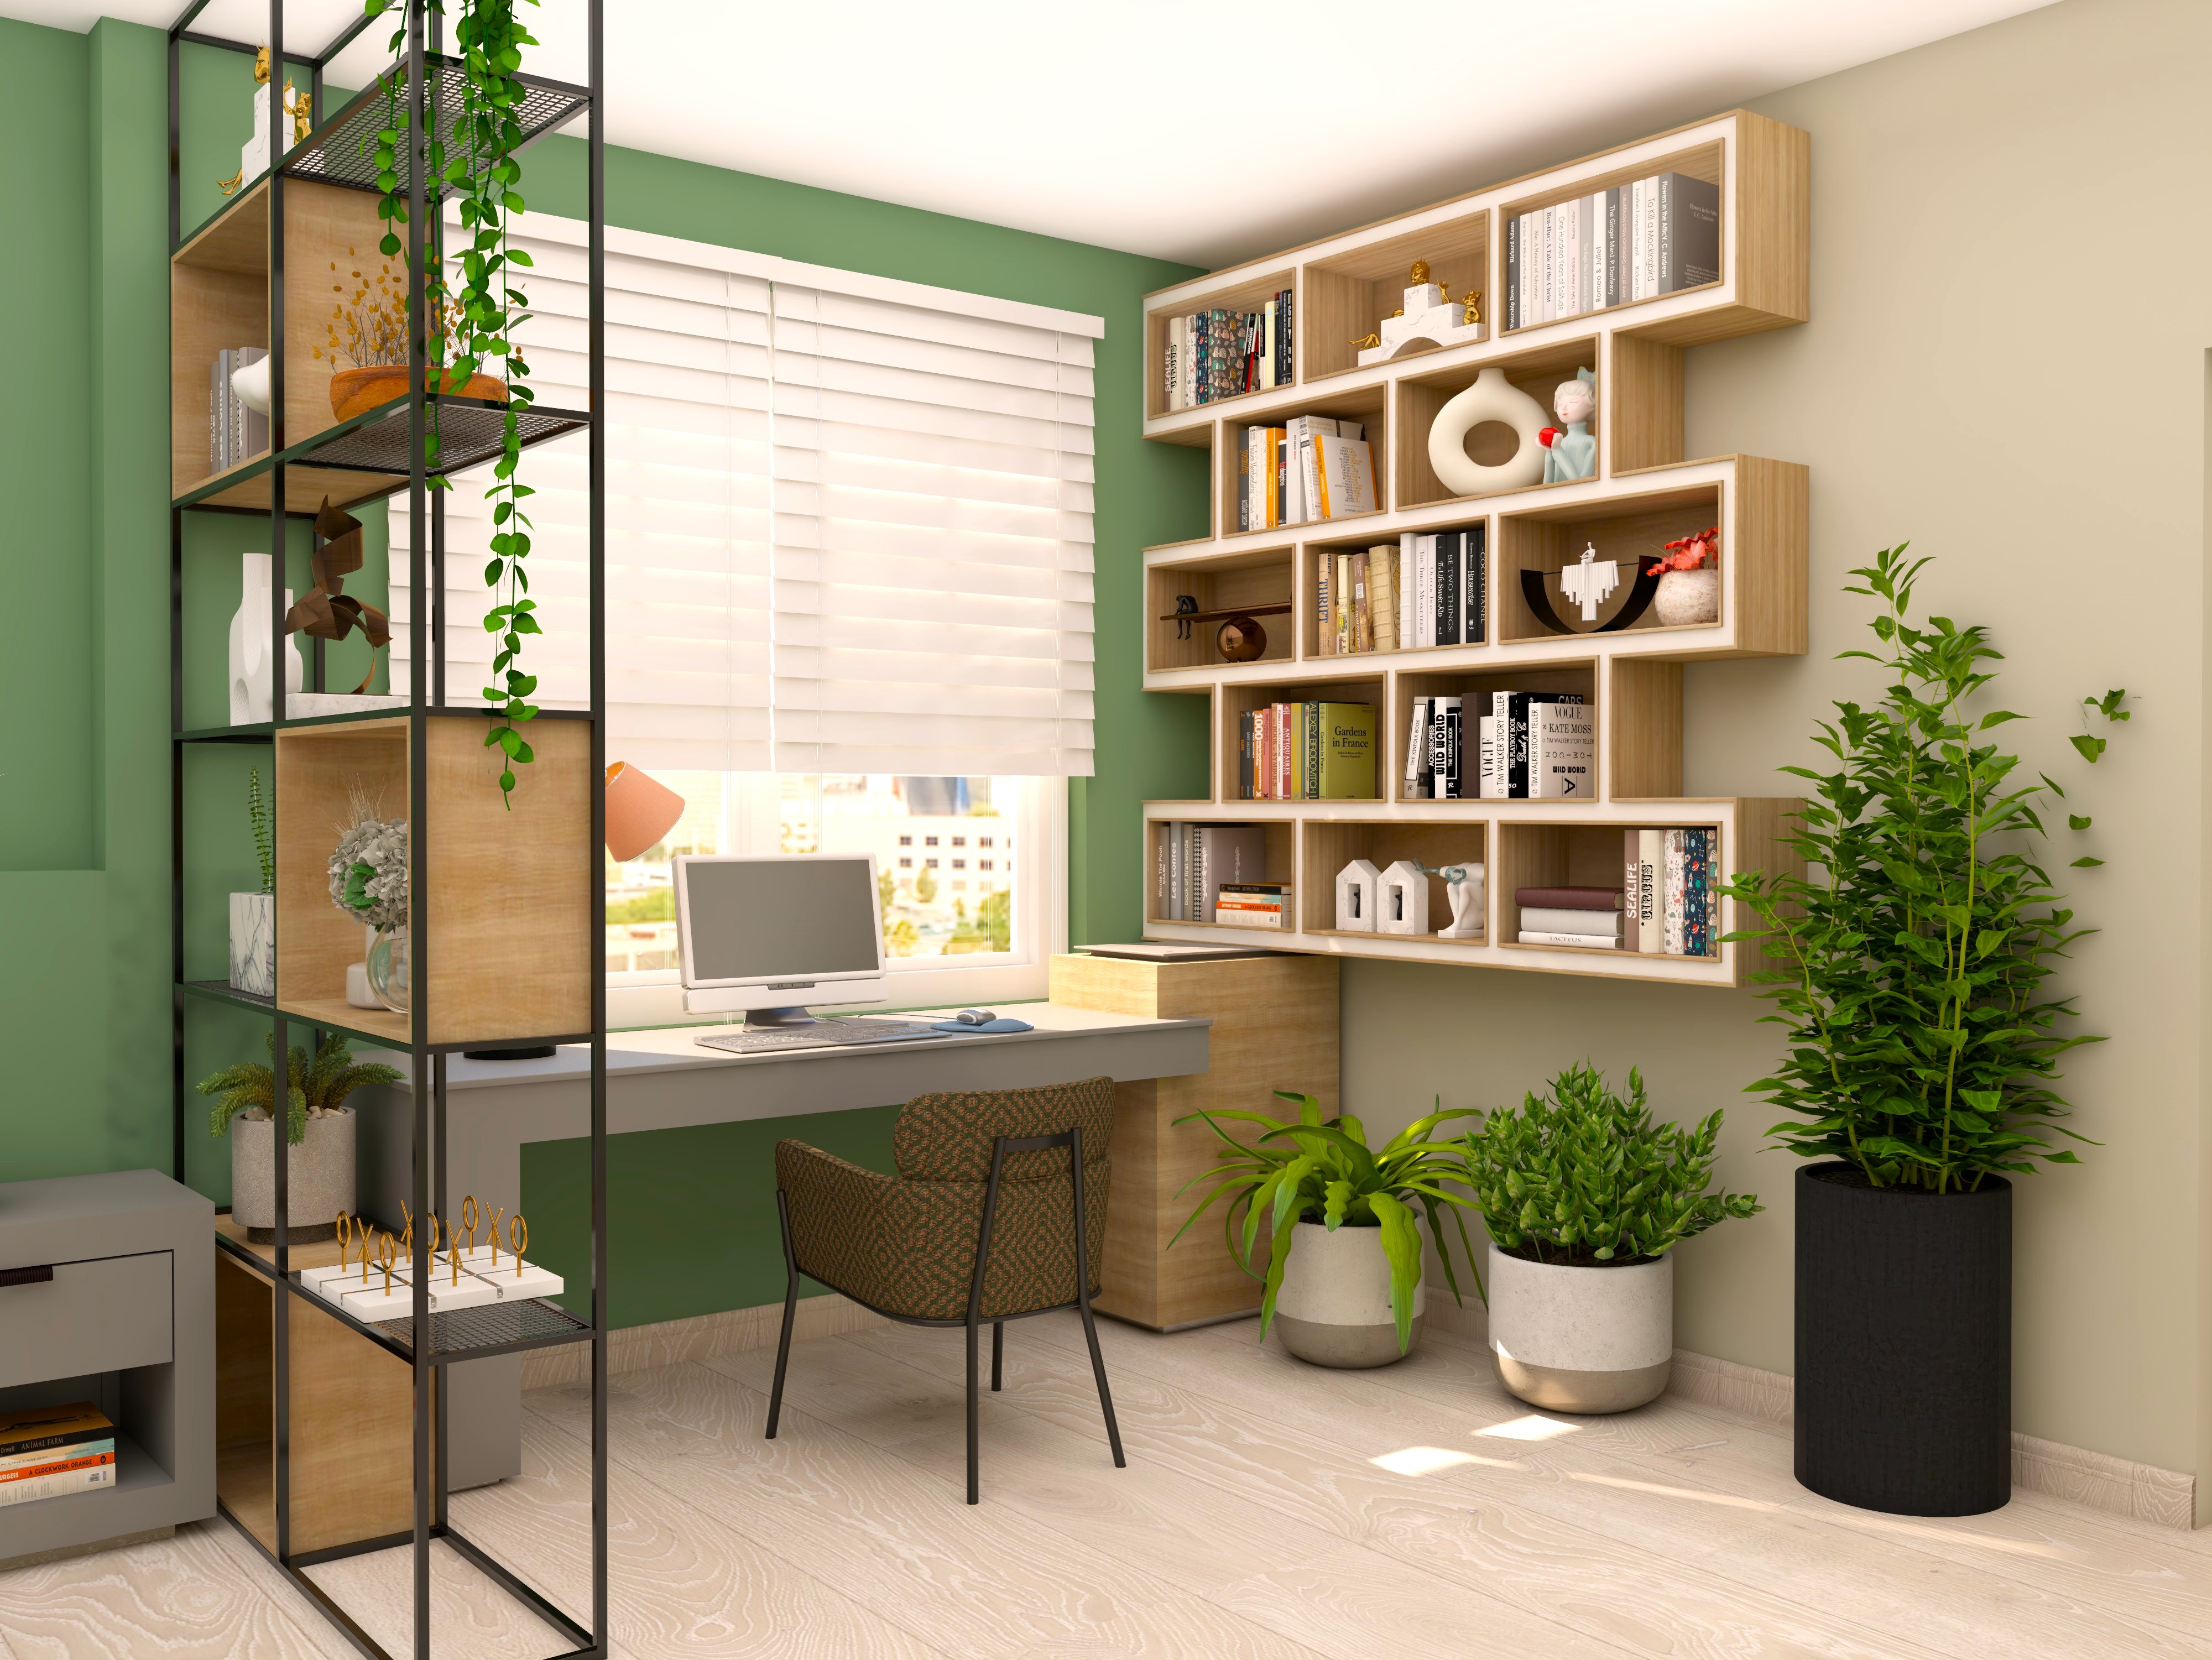 Home office with wall mounted shelves and plants - Beautiful Homes